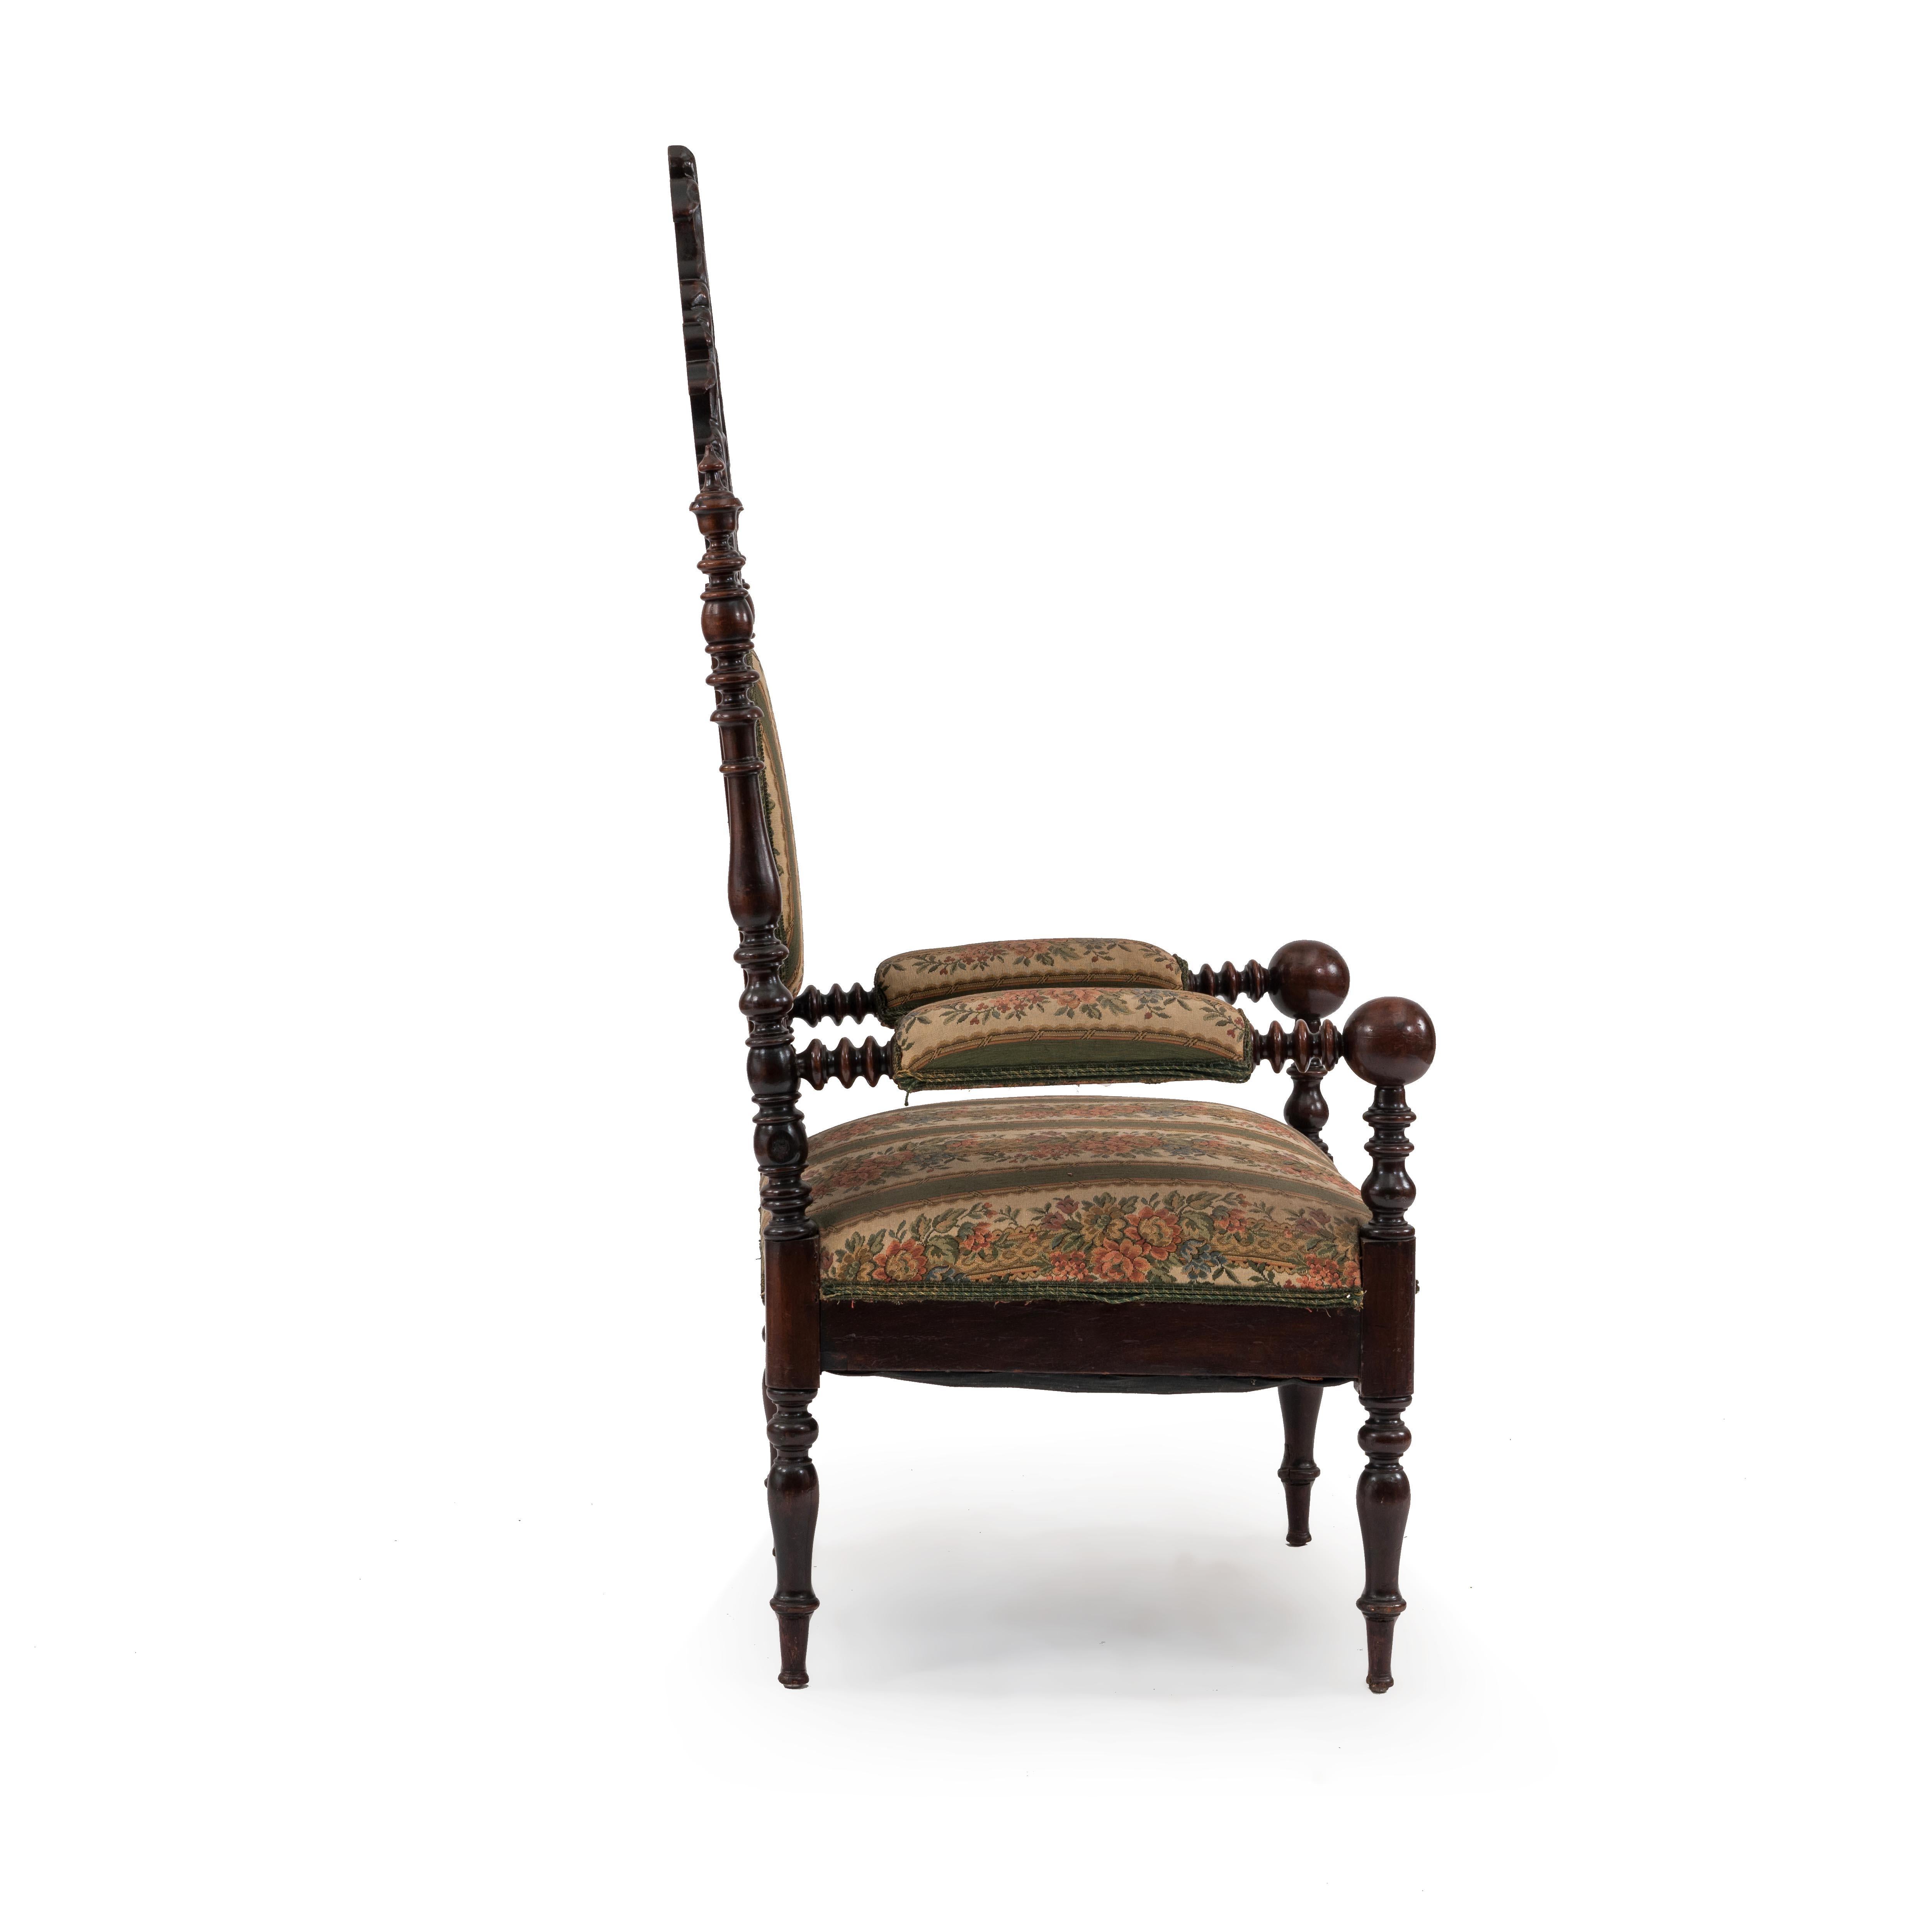 Victorian Gothic Revival Mahogany Arm Chair For Sale